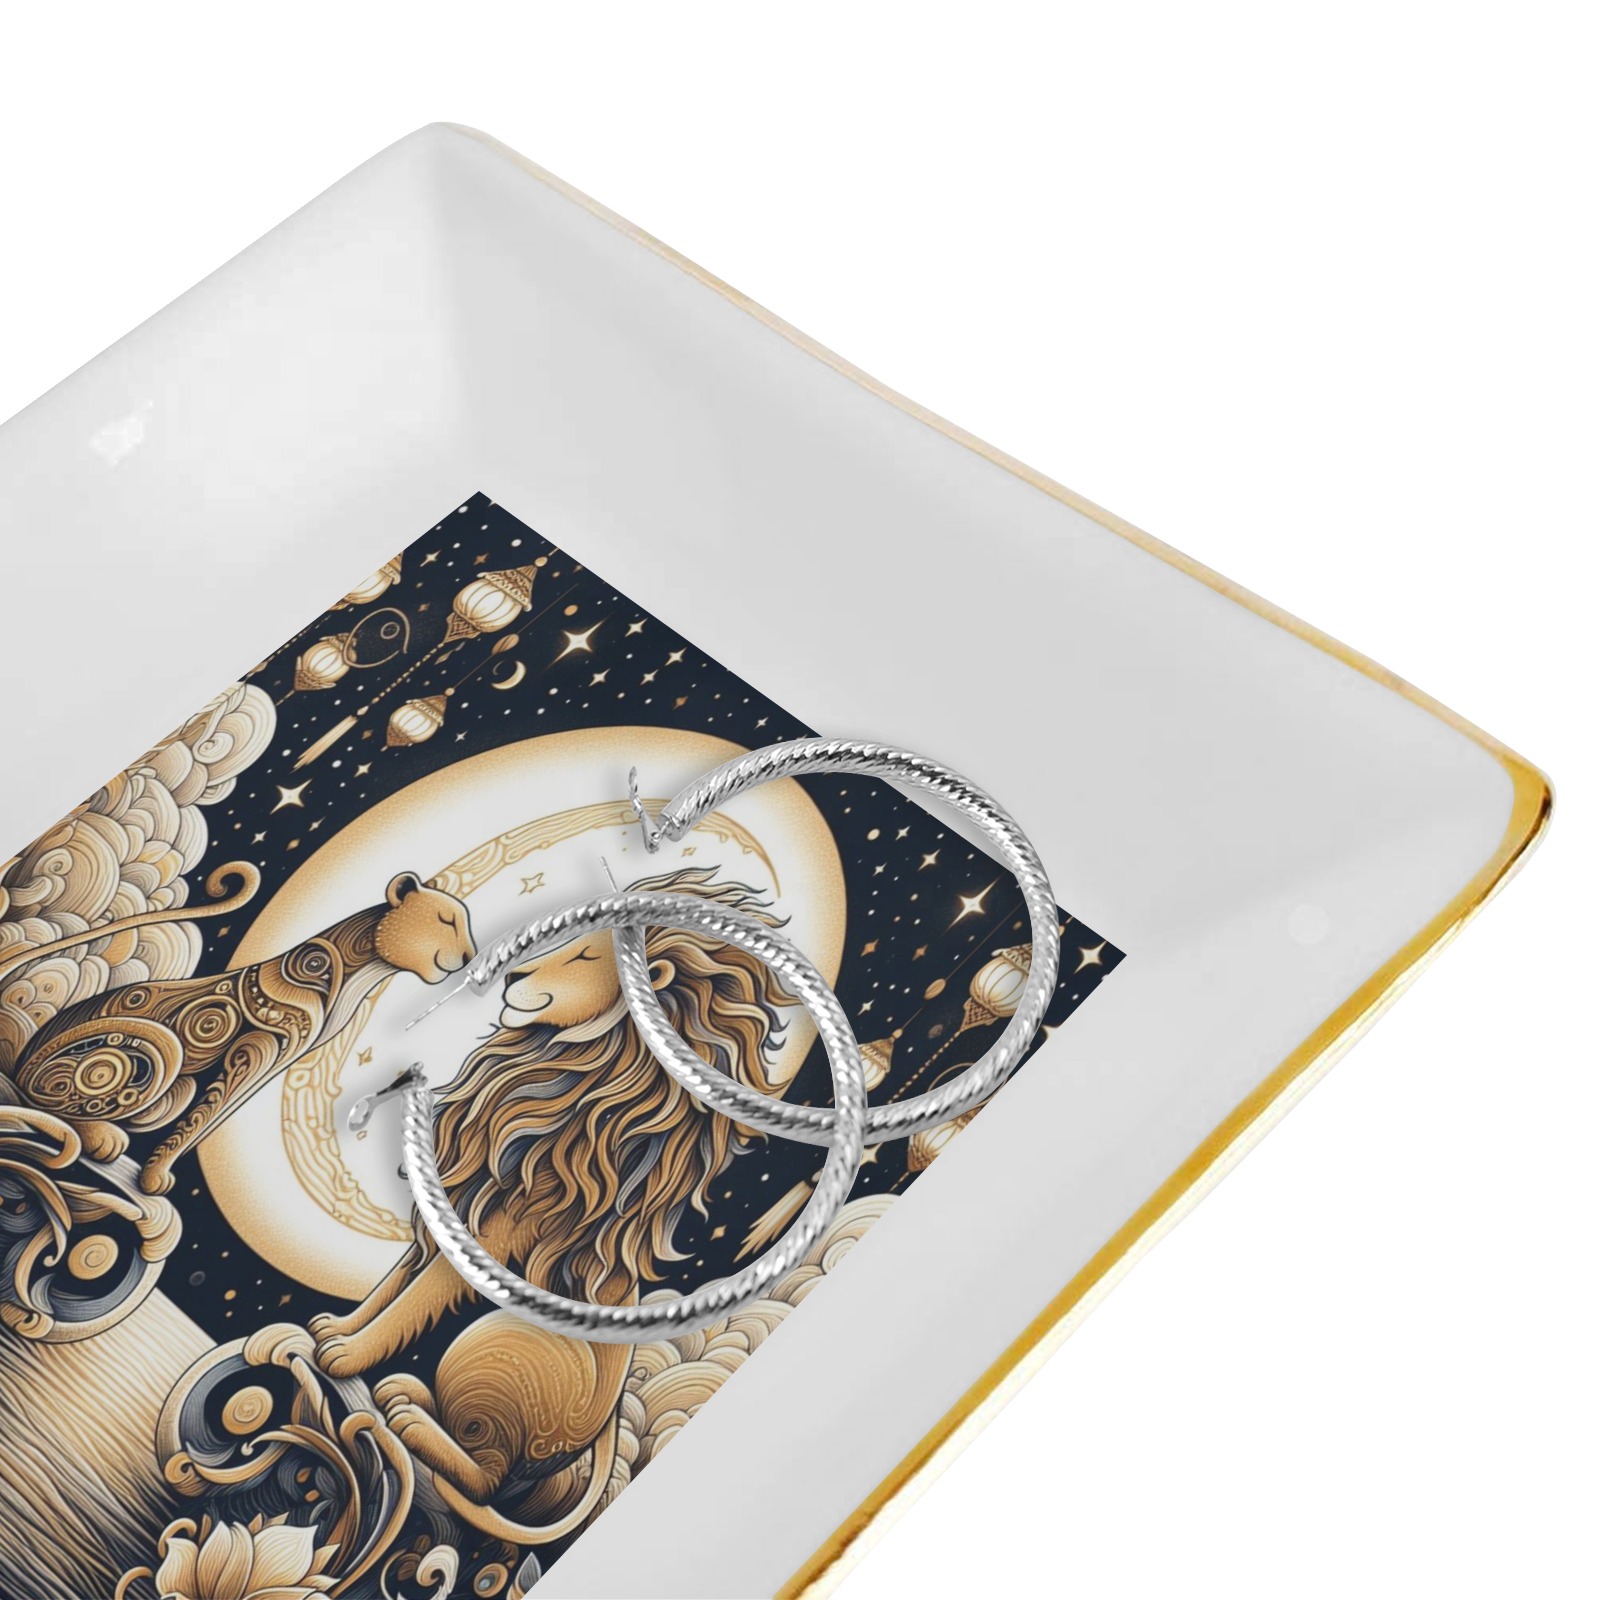 Moonlight Lions Love Square Jewelry Tray with Golden Edge